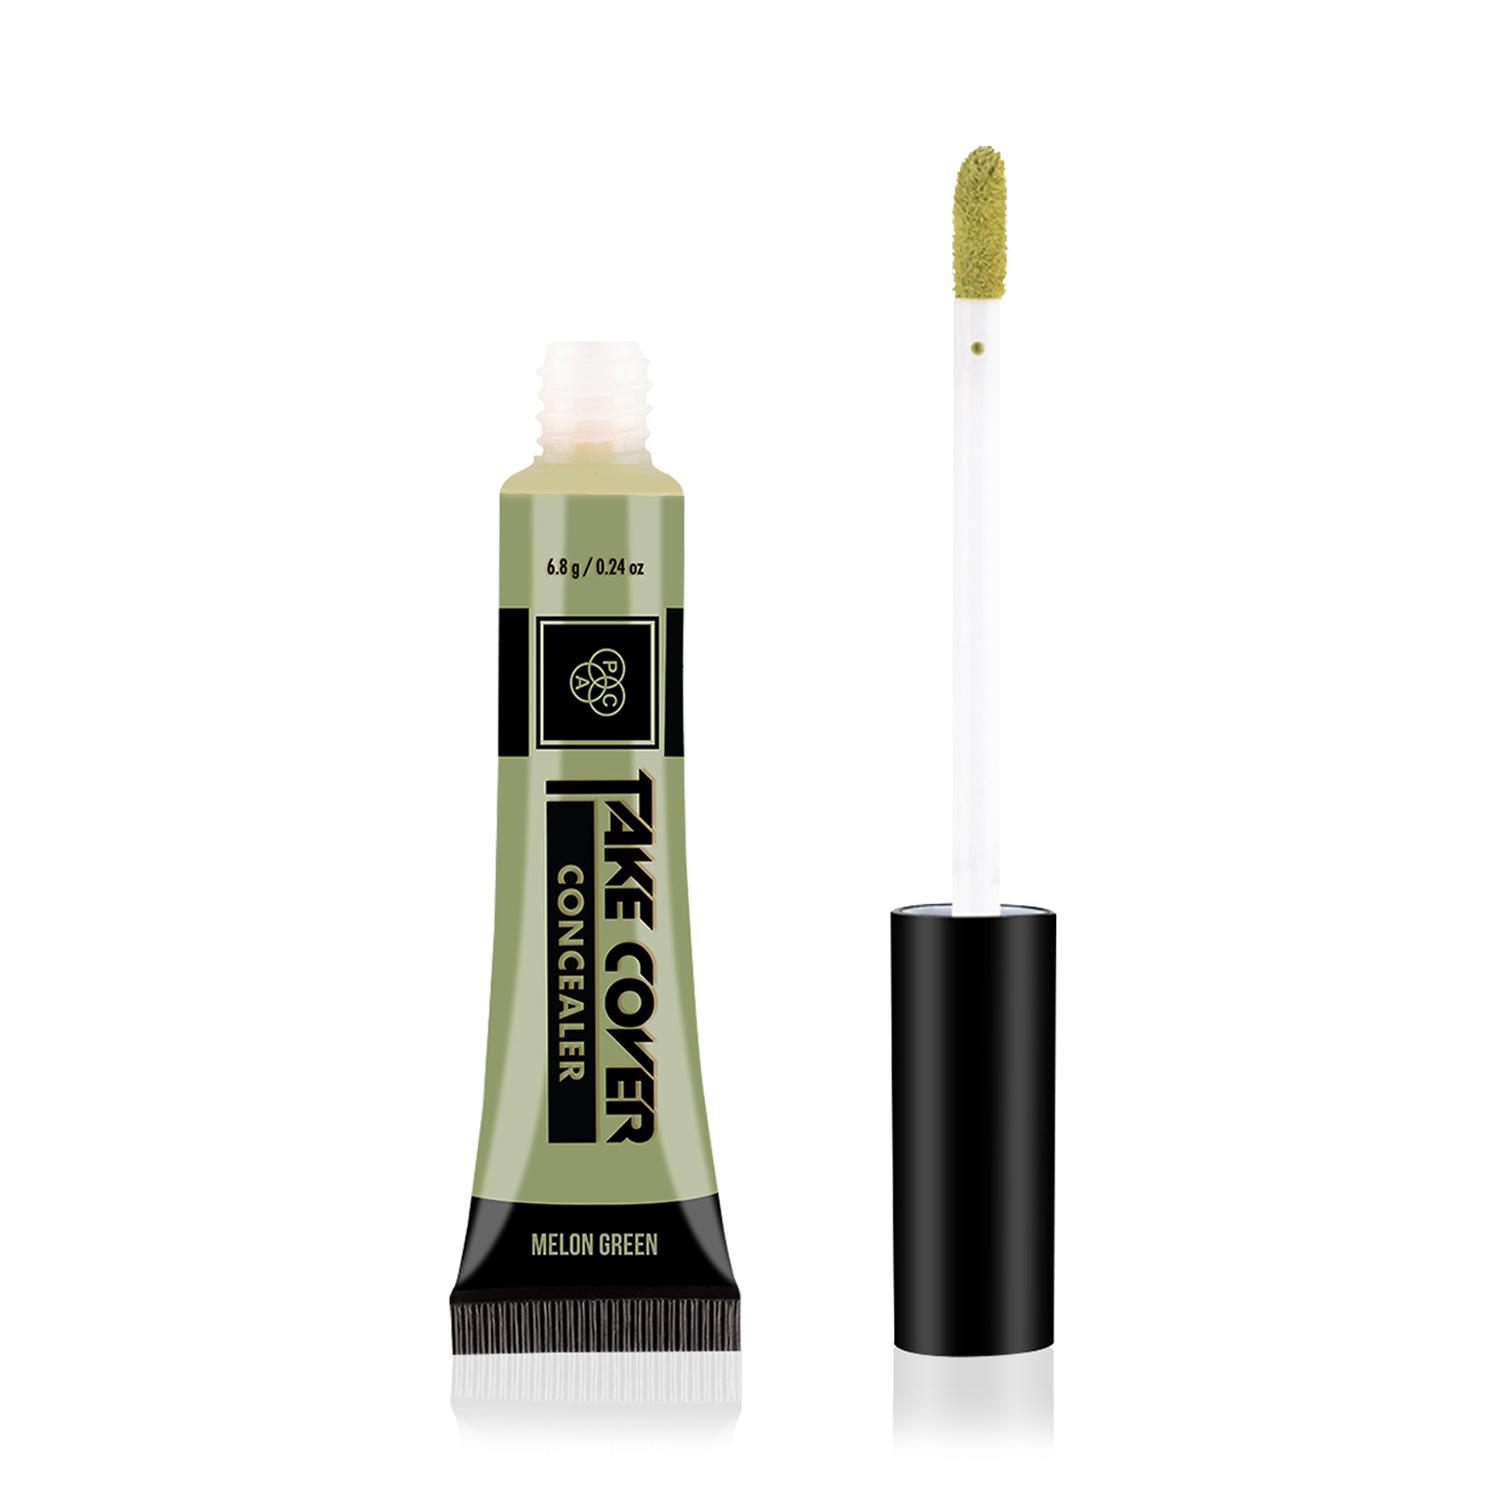 PAC | PAC Take Cover Concealer - 19 Melon Green (6.8g)